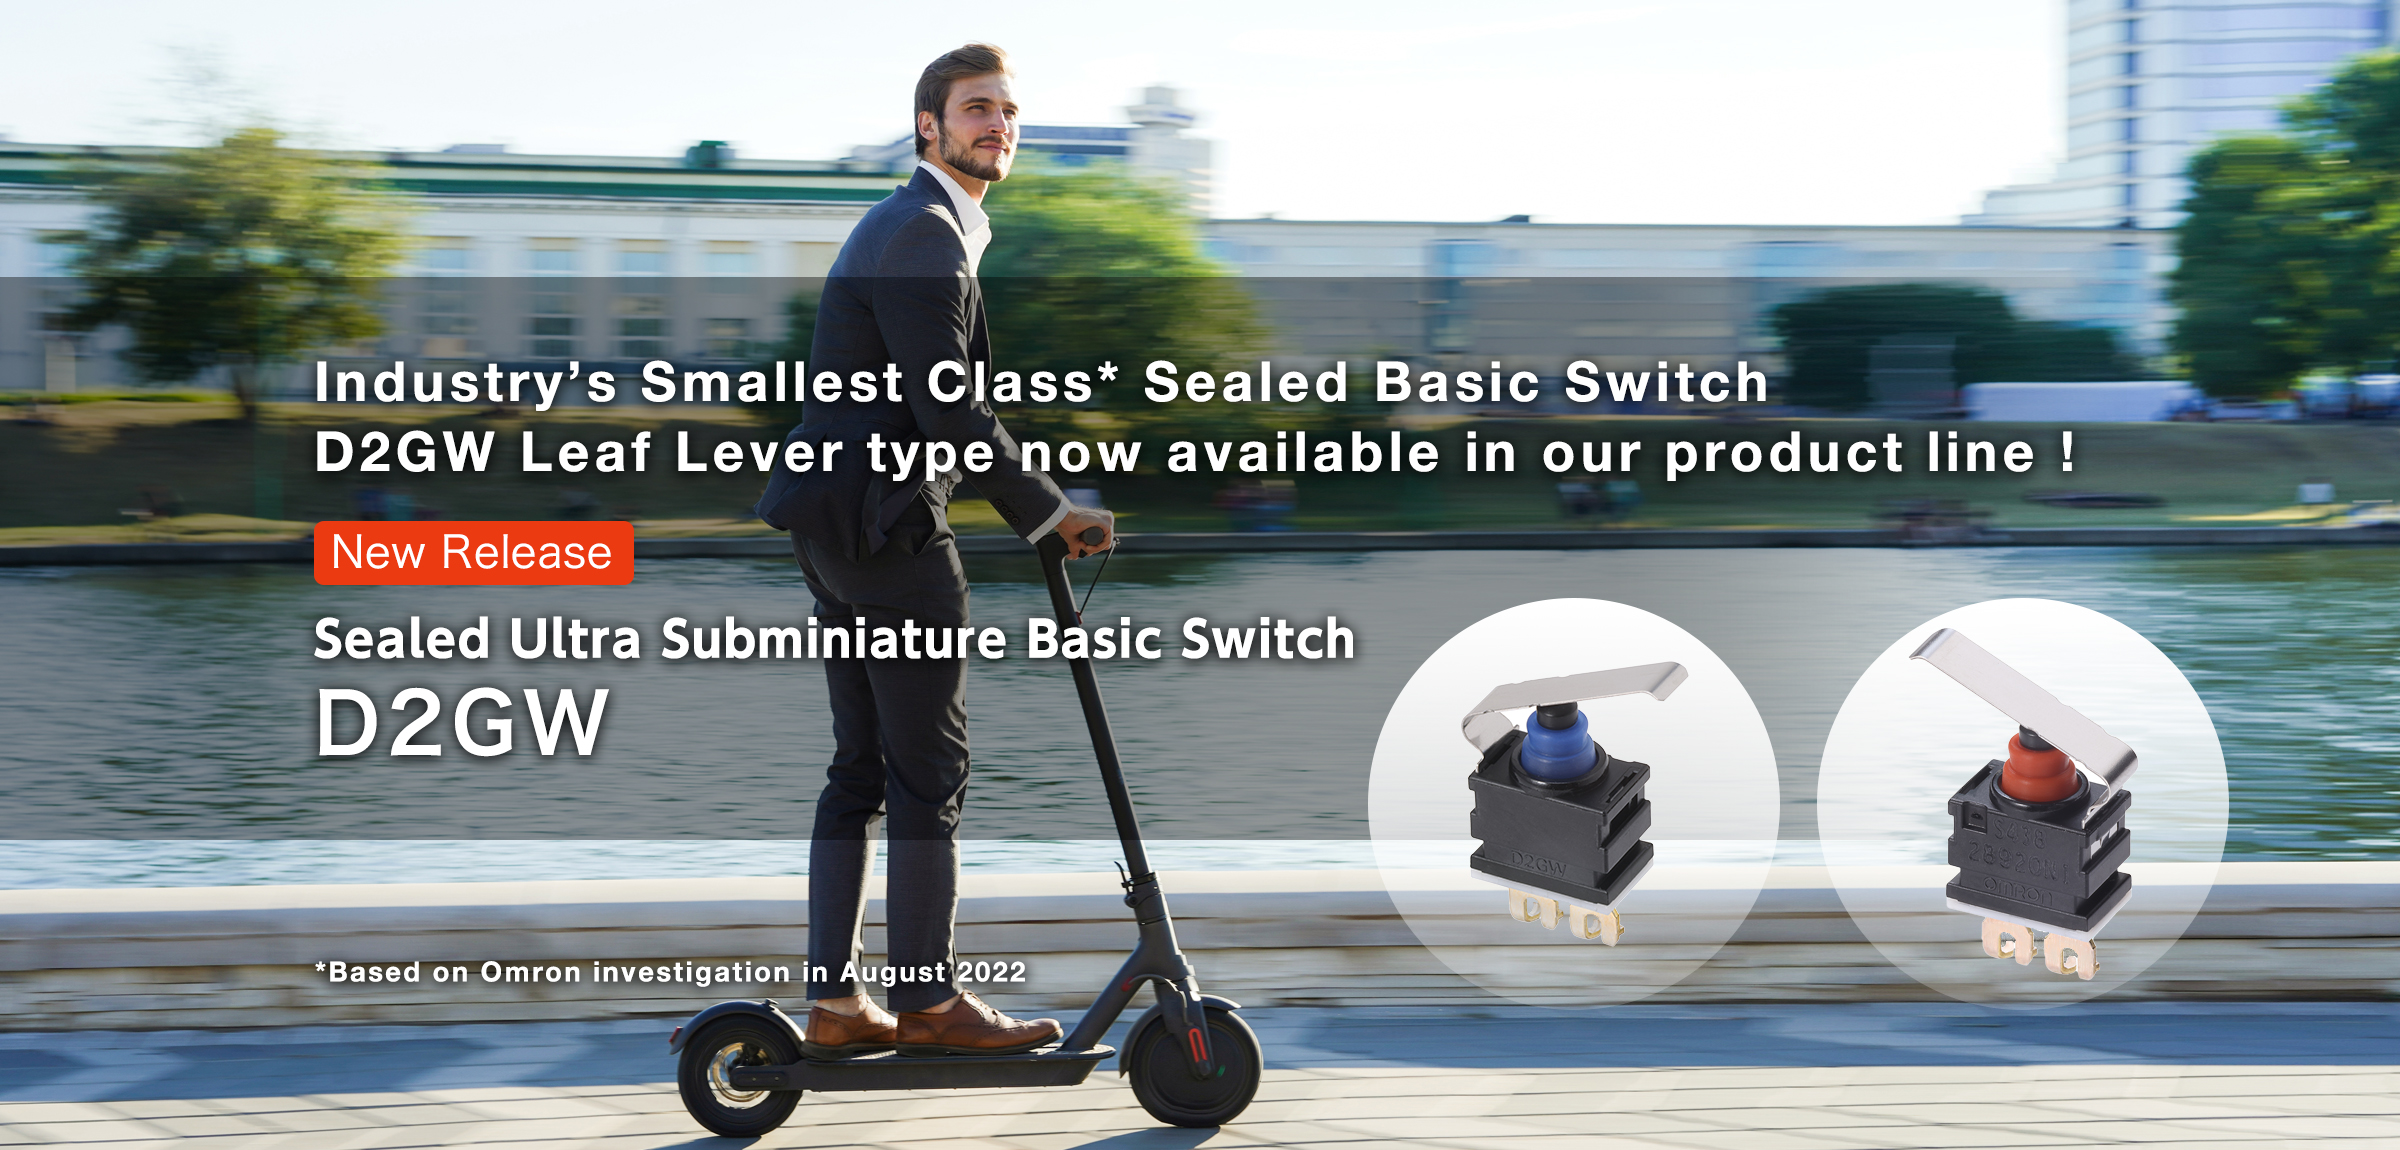 Industry’s Smallest Class* Sealed Basic Switch D2GW Leaf Lever type now available in our product line！ Sealed Ultra Subminiature Basic Switch D2GW *Based on Omron investigation in August 2022